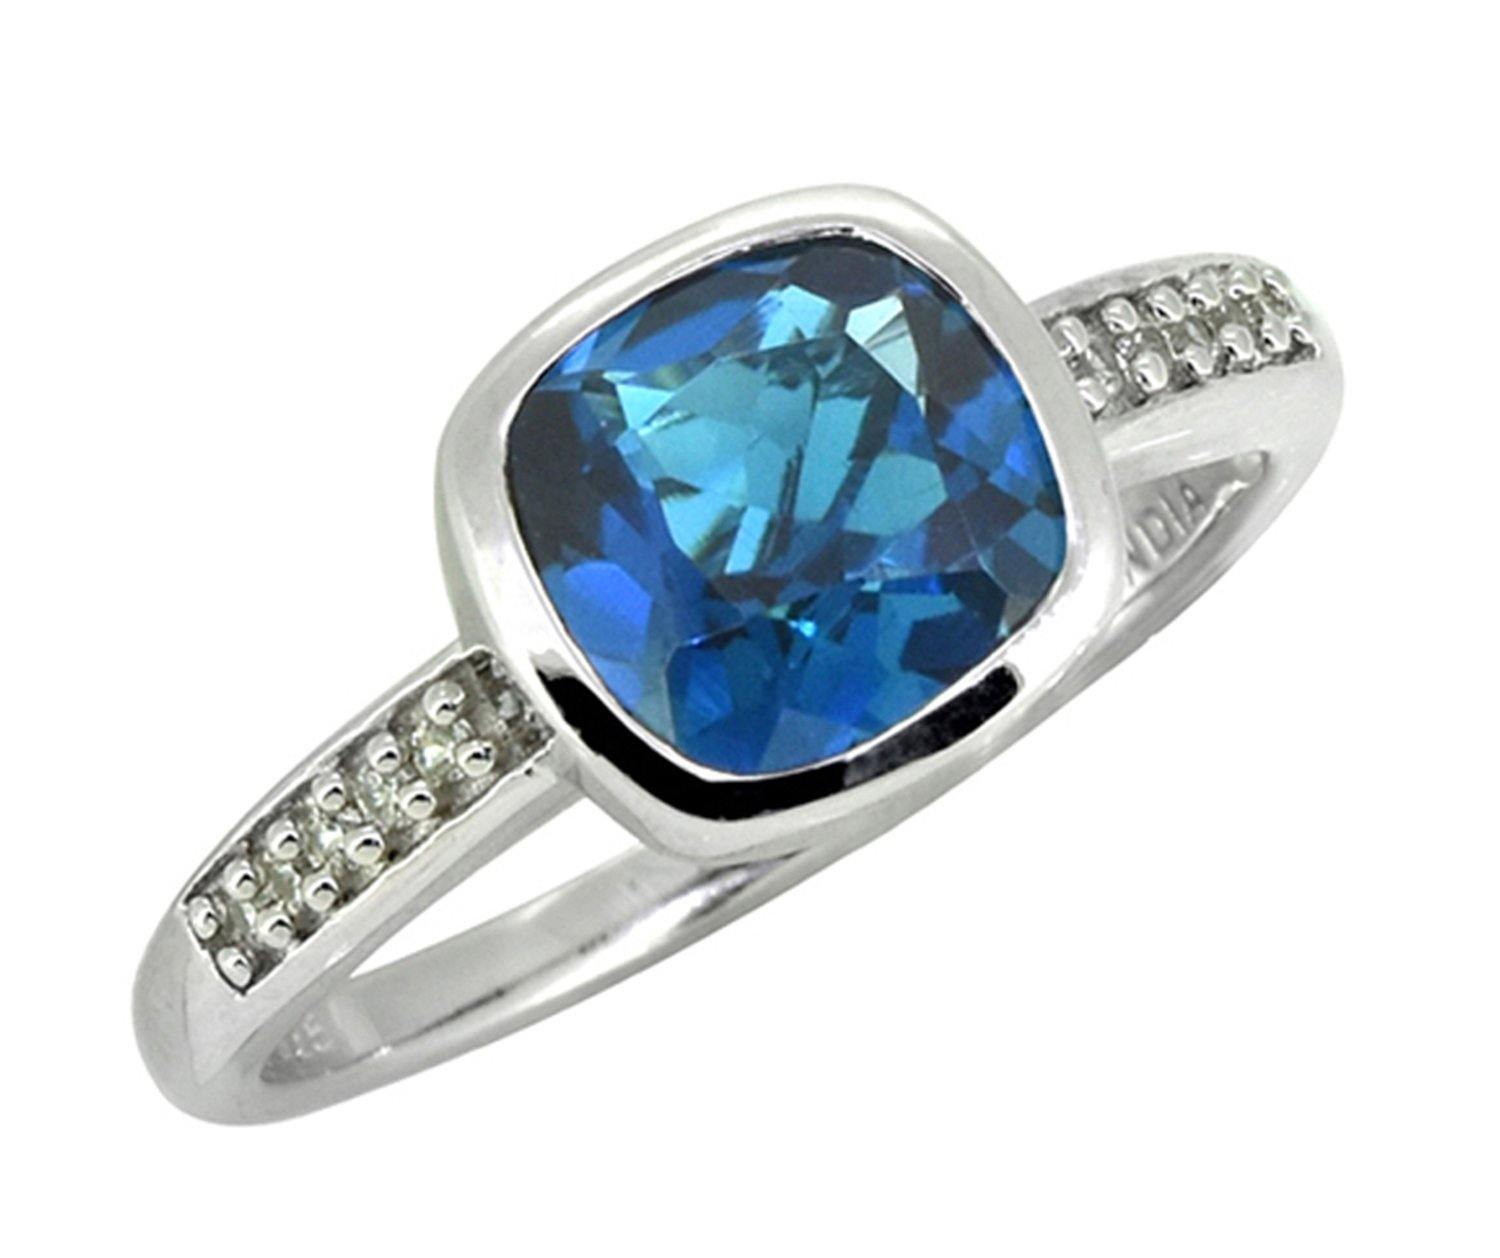 2.90 Cts. London Blue Topaz Solid 925 Sterling Silver Ring Jewelry - YoTreasure